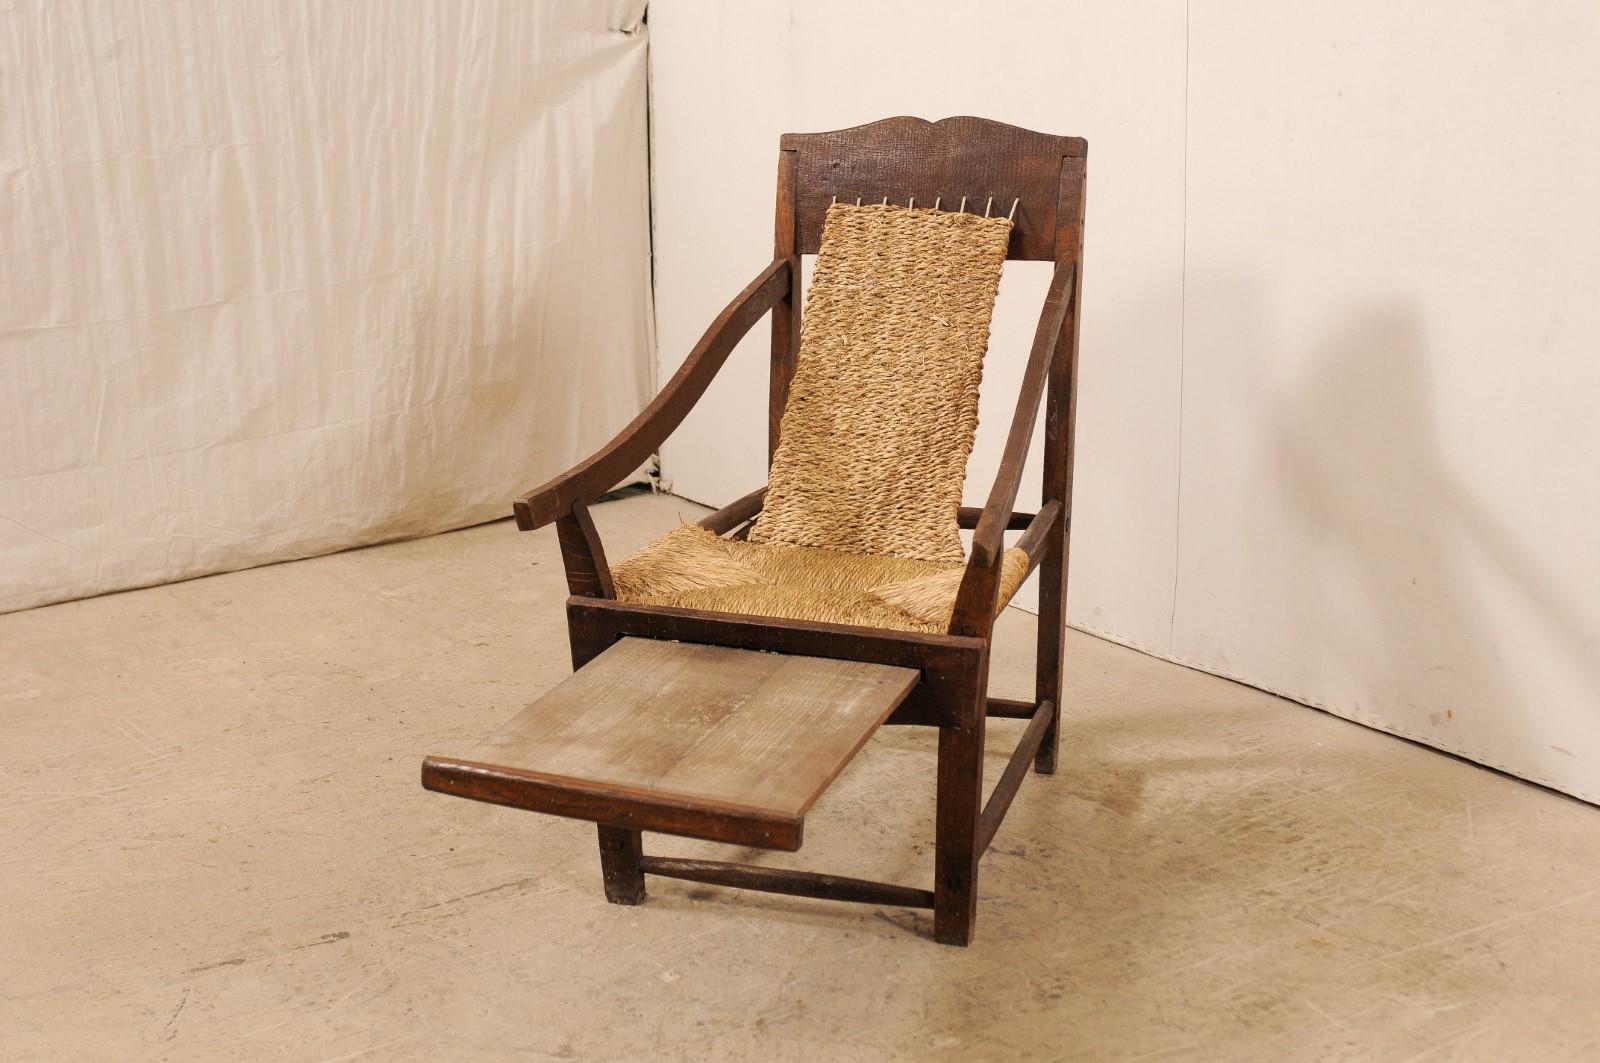 Italian Sling Lounge Chair w/ Rush Seating & Extendable Foot-Rest, Early 20th C. For Sale 2